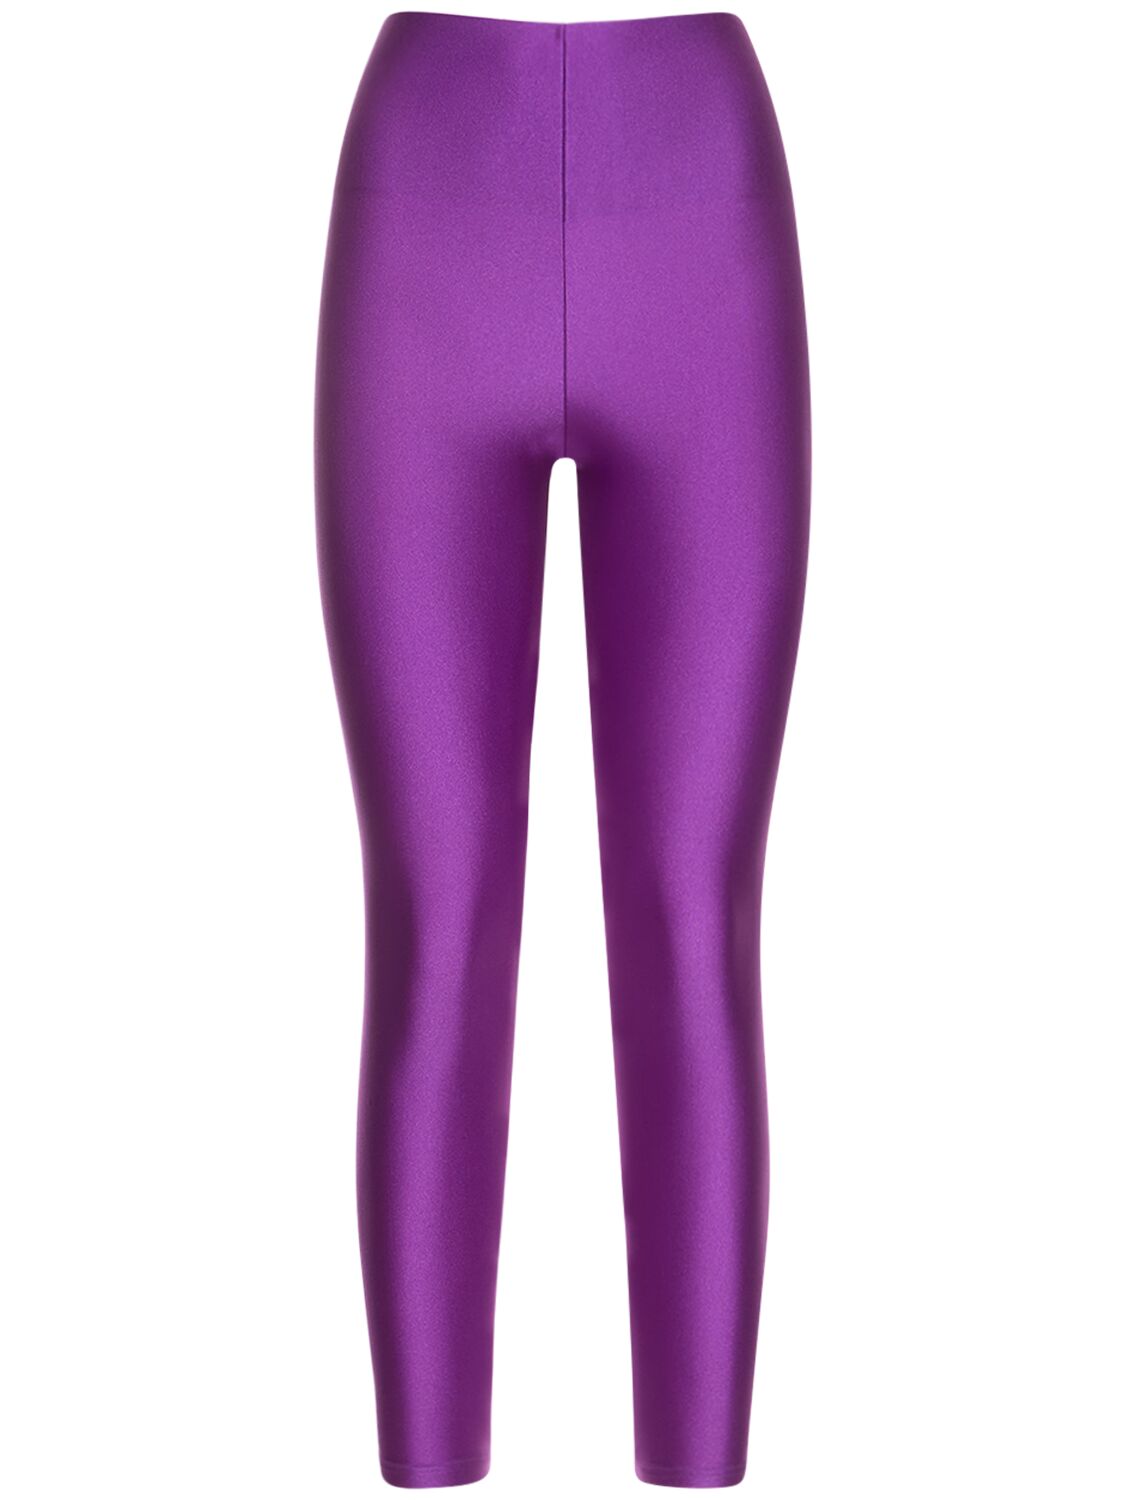 Holly 80's Stretch Jersey Leggings